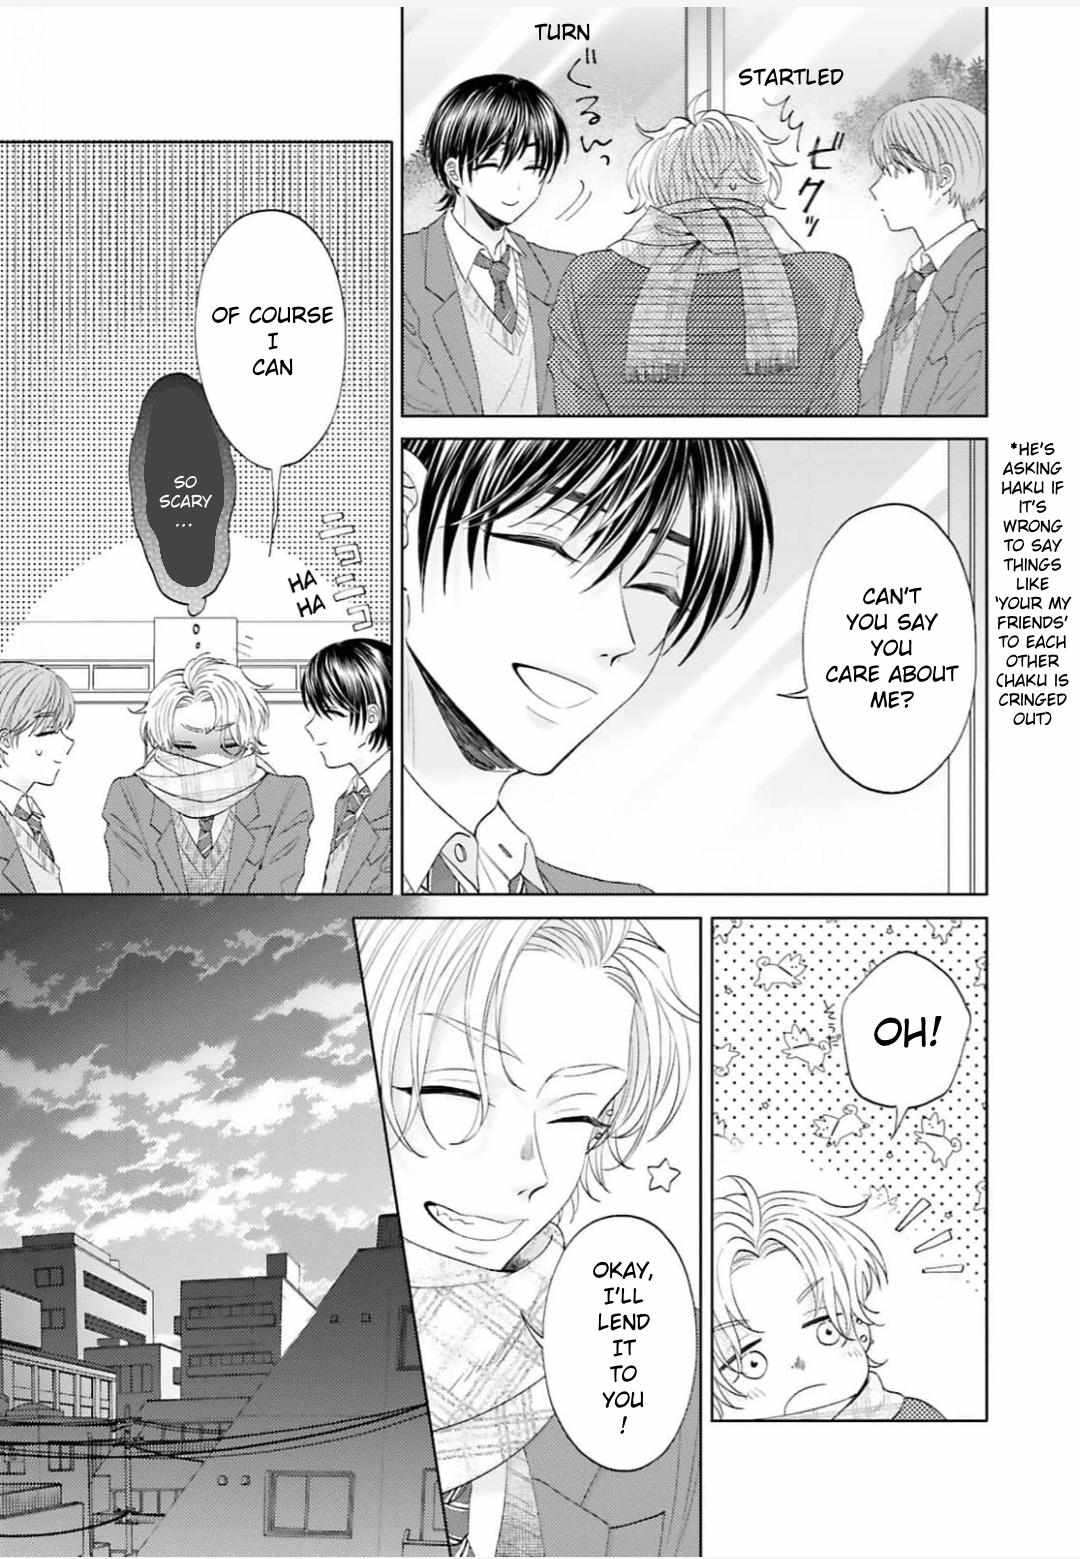 My Cutie Pie -An Ordinary Boy And His Gorgeous Childhood Friend- 〘Official〙 - chapter 10 - #5